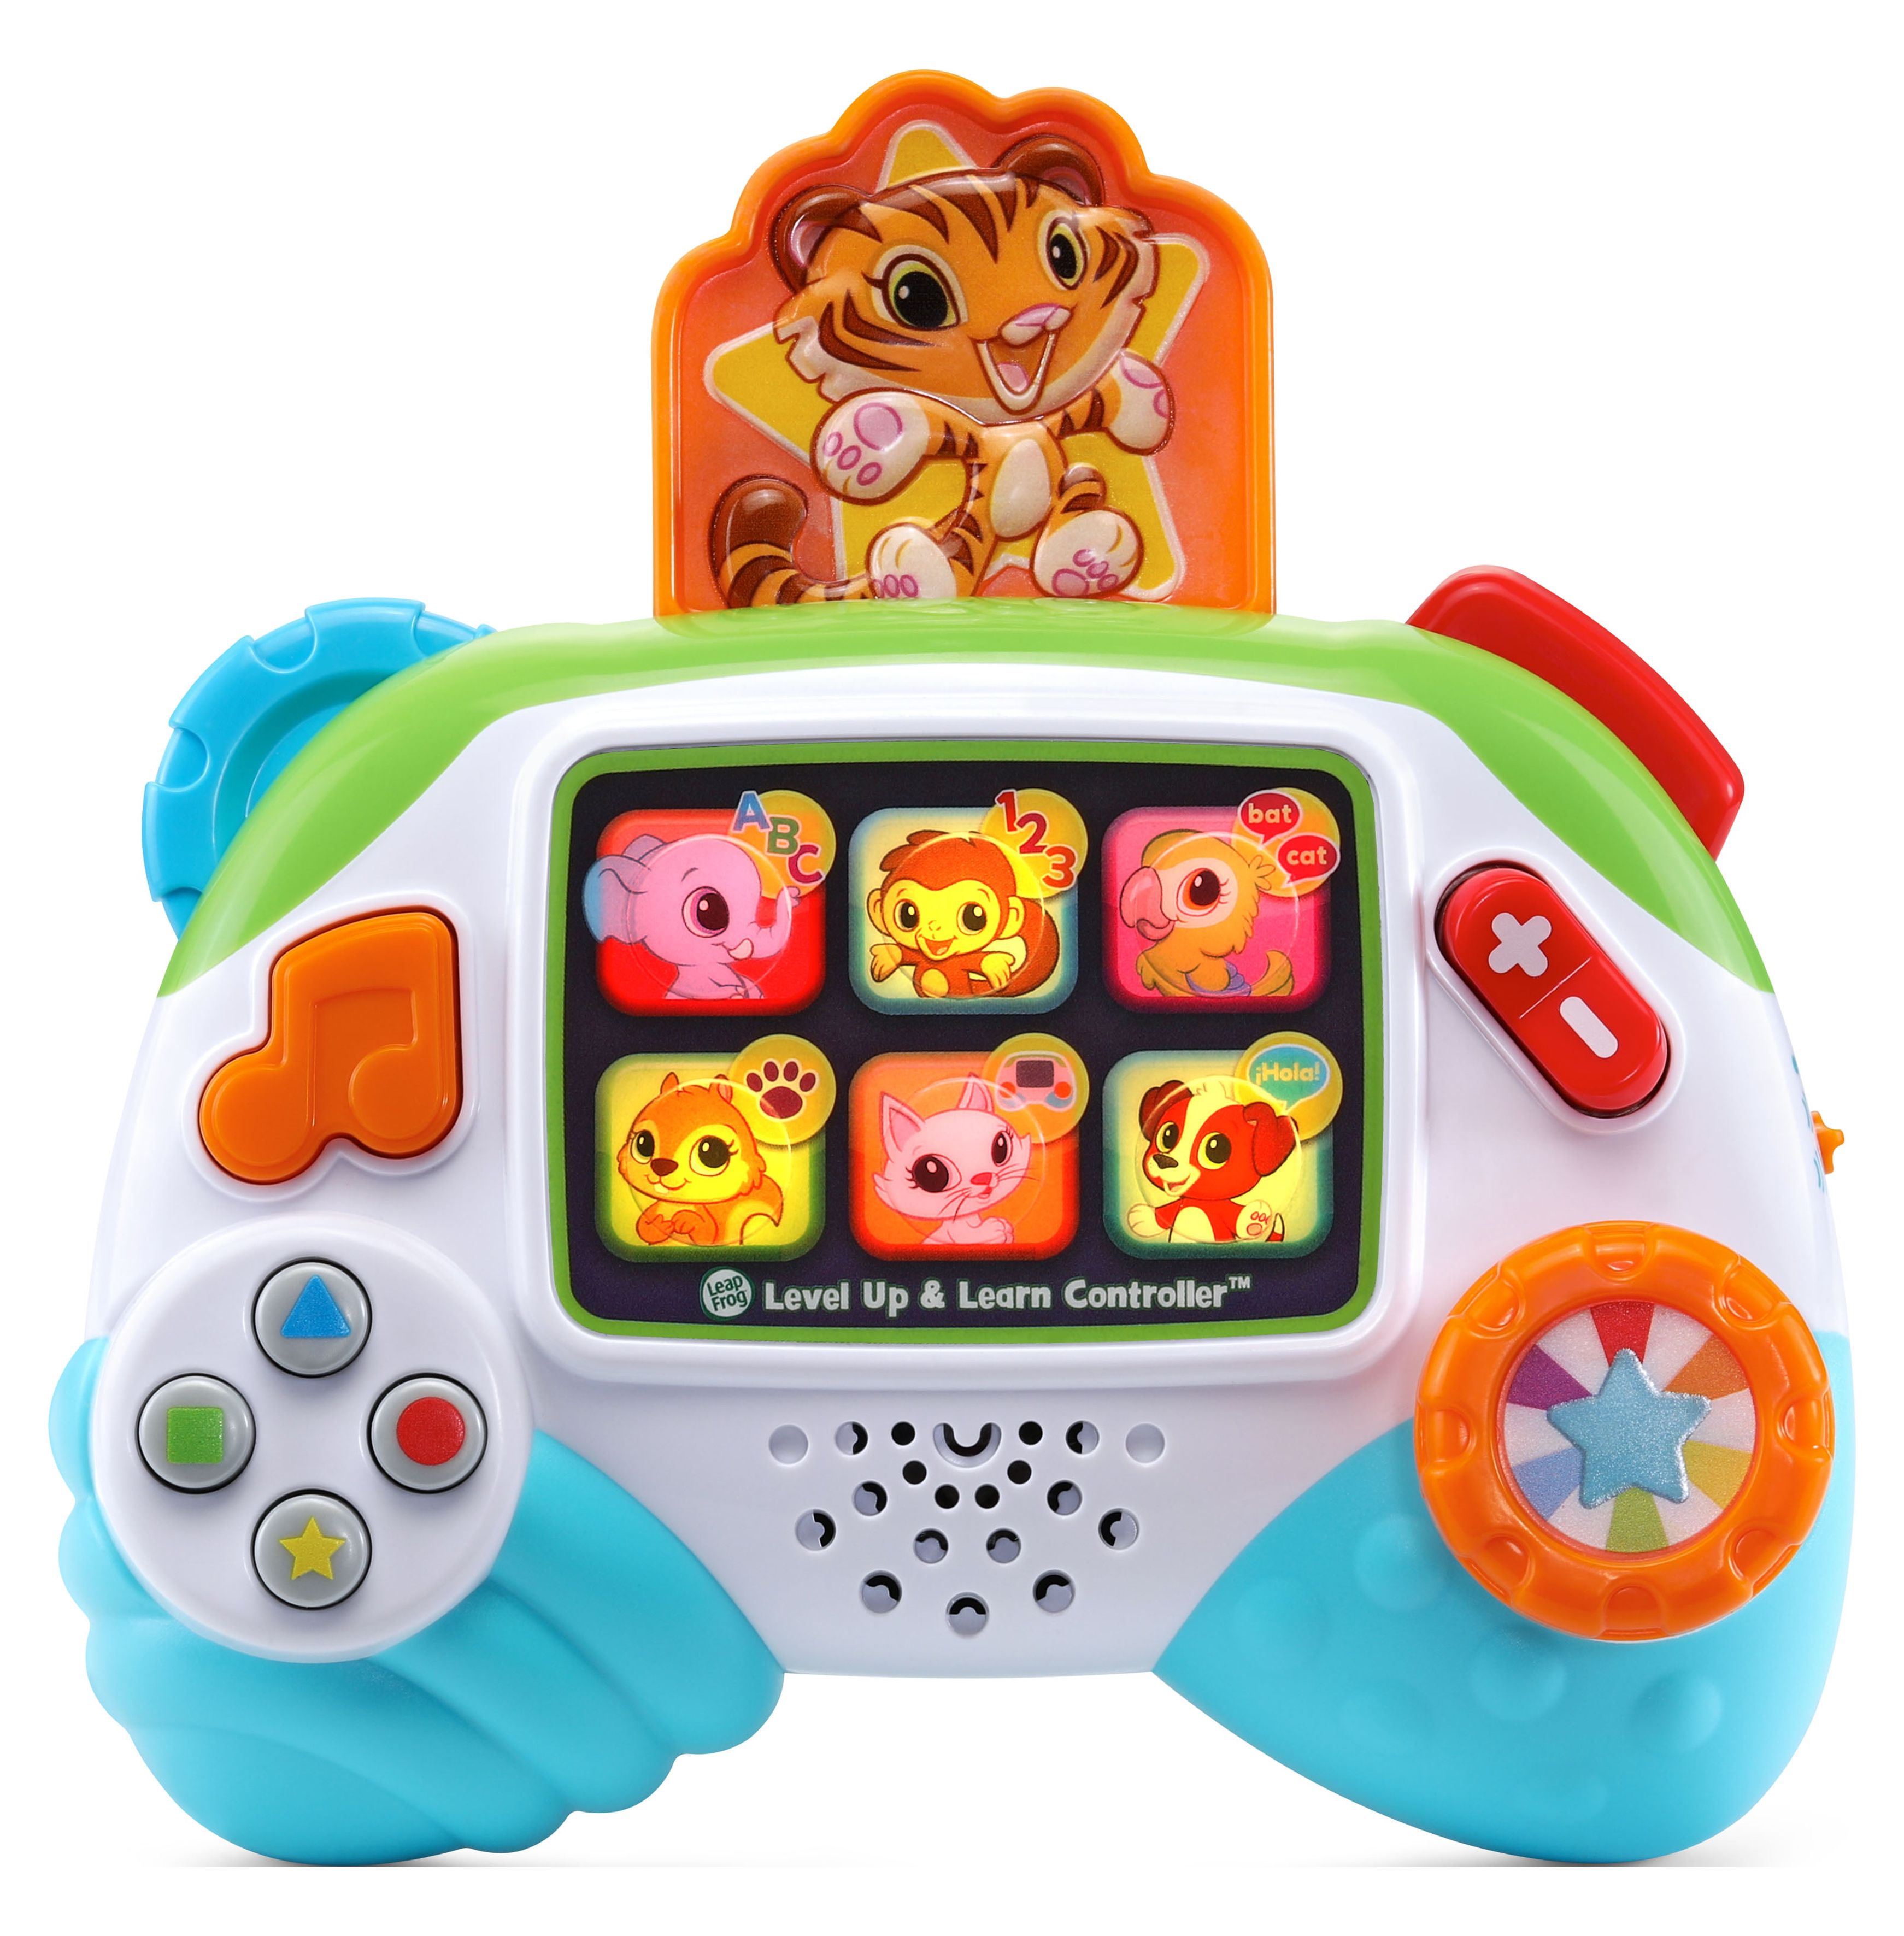 LeapFrog® Level Up & Learn Controller, Toddler Toy, Teaches ABCs, Numbers, Spanish - image 1 of 10